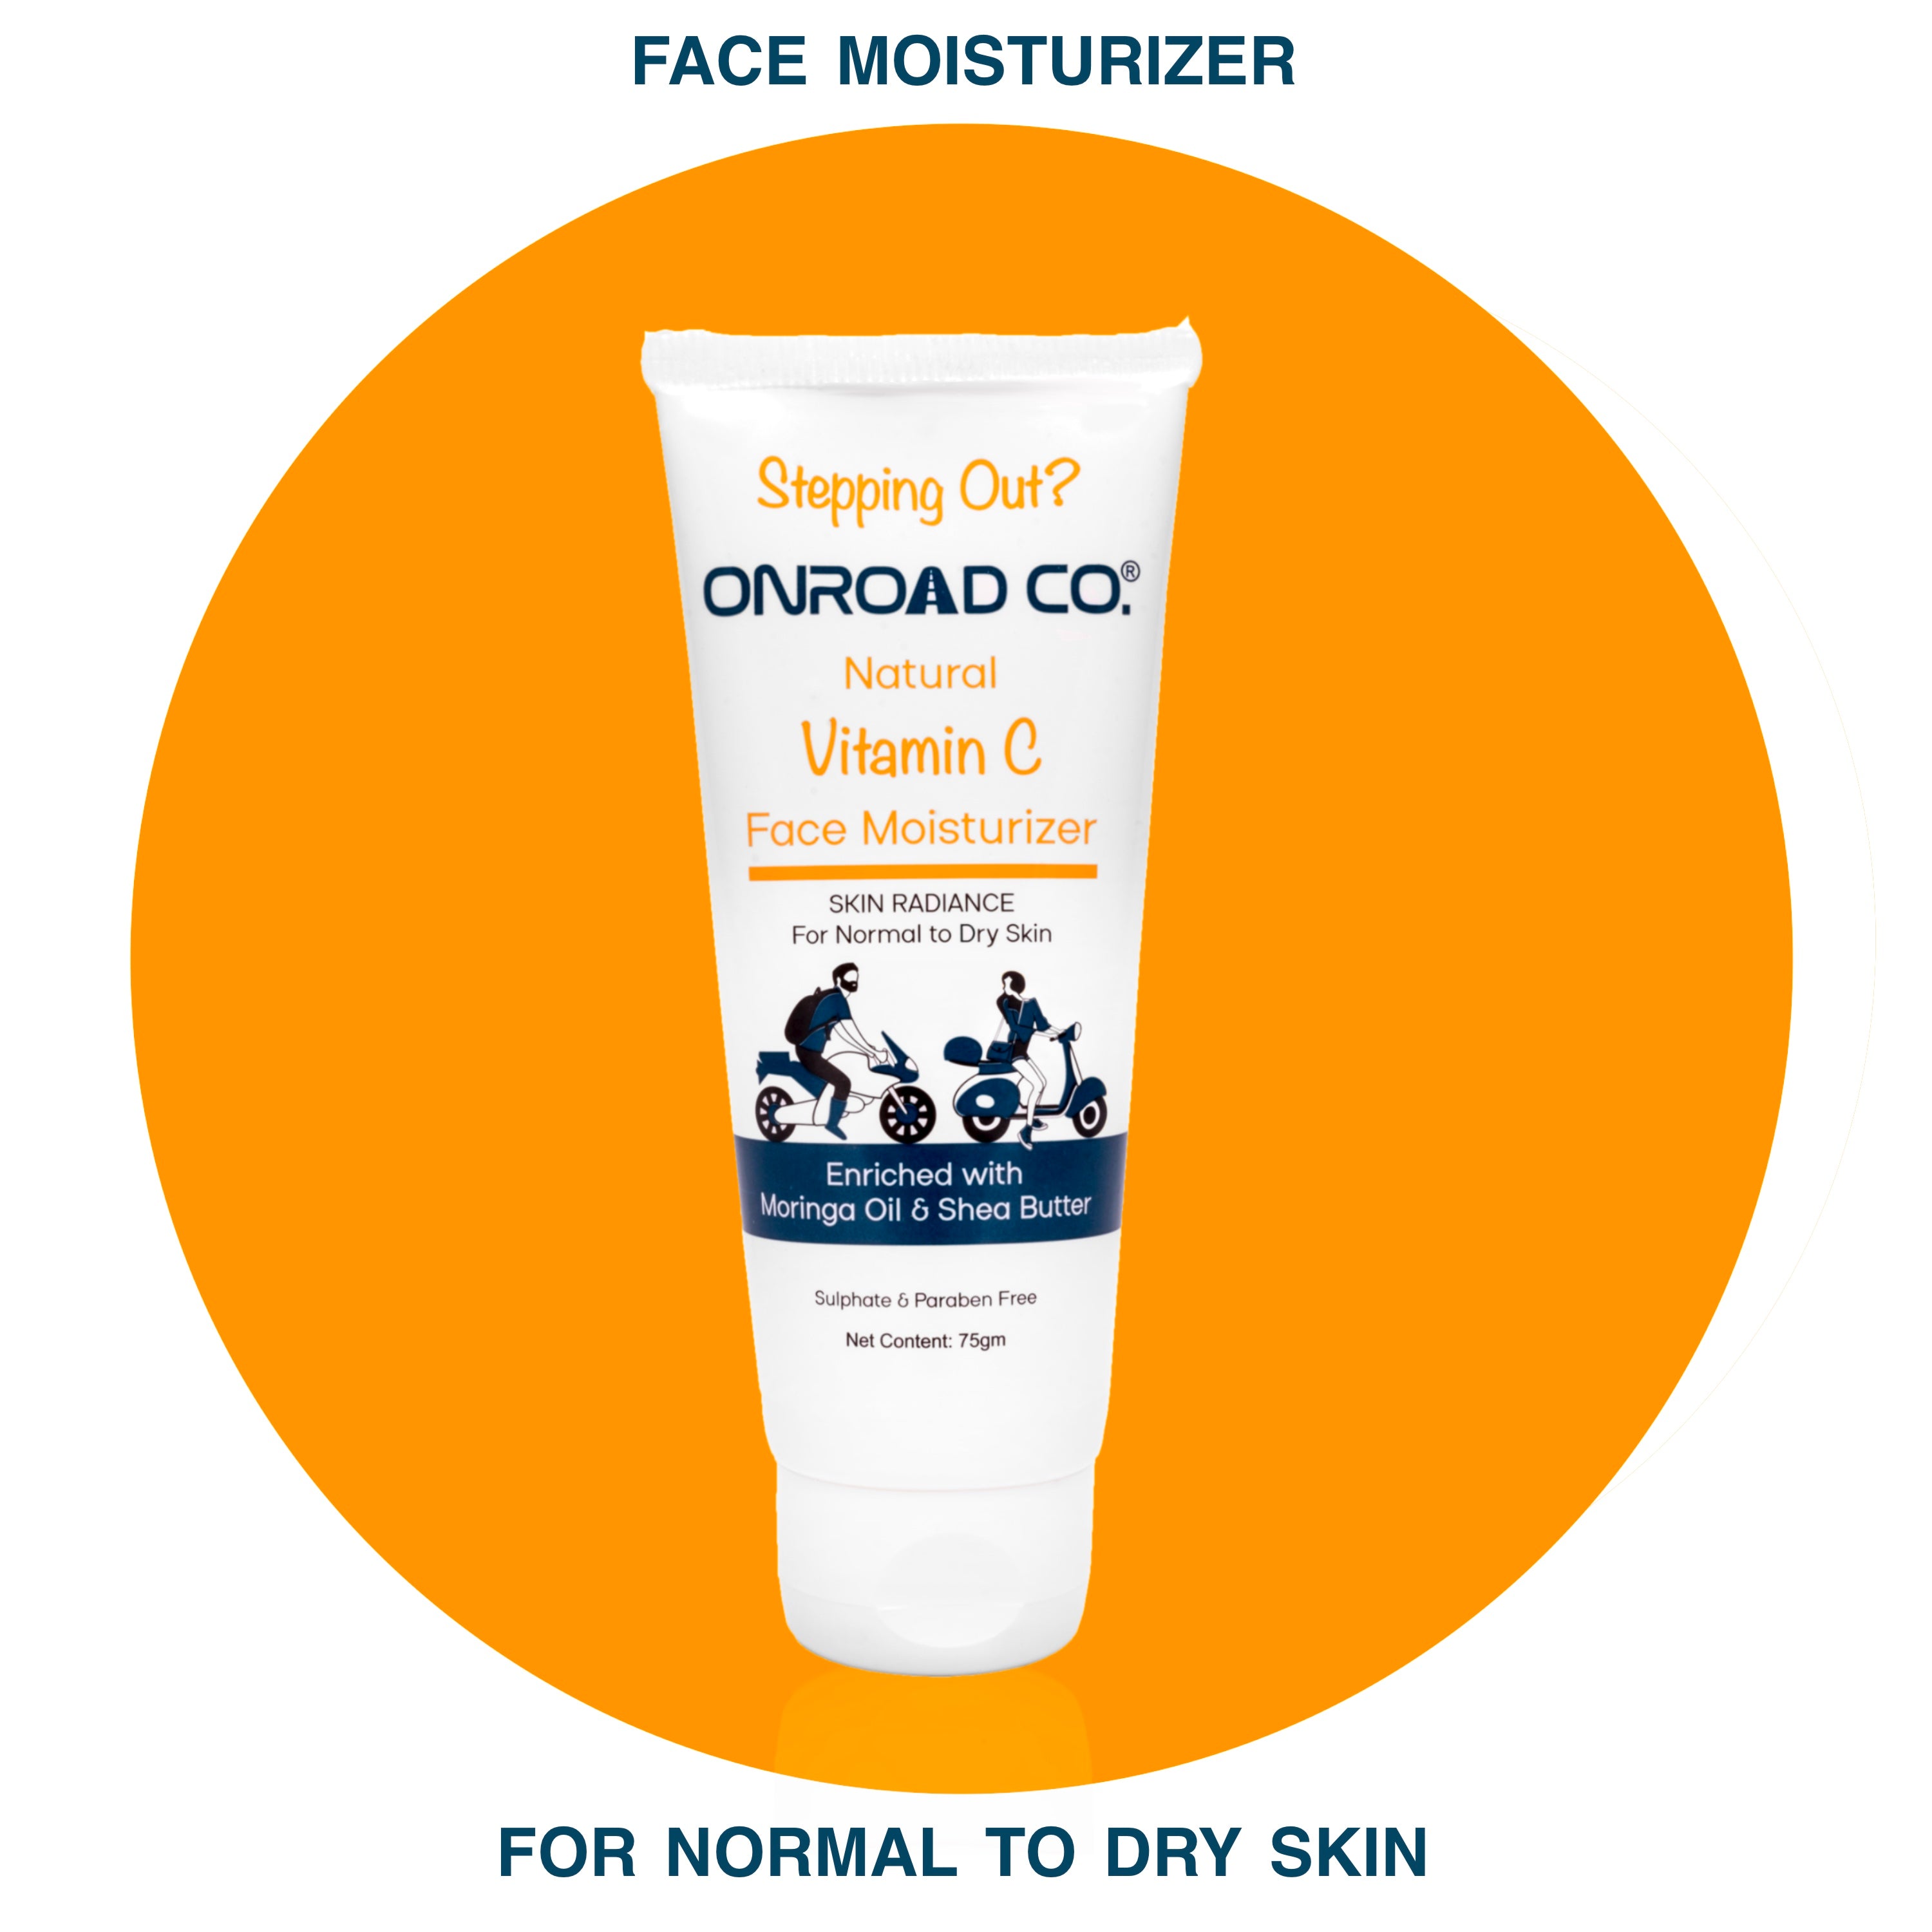 Vitamin C Face Moisturizer | Especially for Normal to Dry Skin | Enriched with Moringa Oil and Shea Butter | No Sulphates & Parabens | 100% Toxin Free